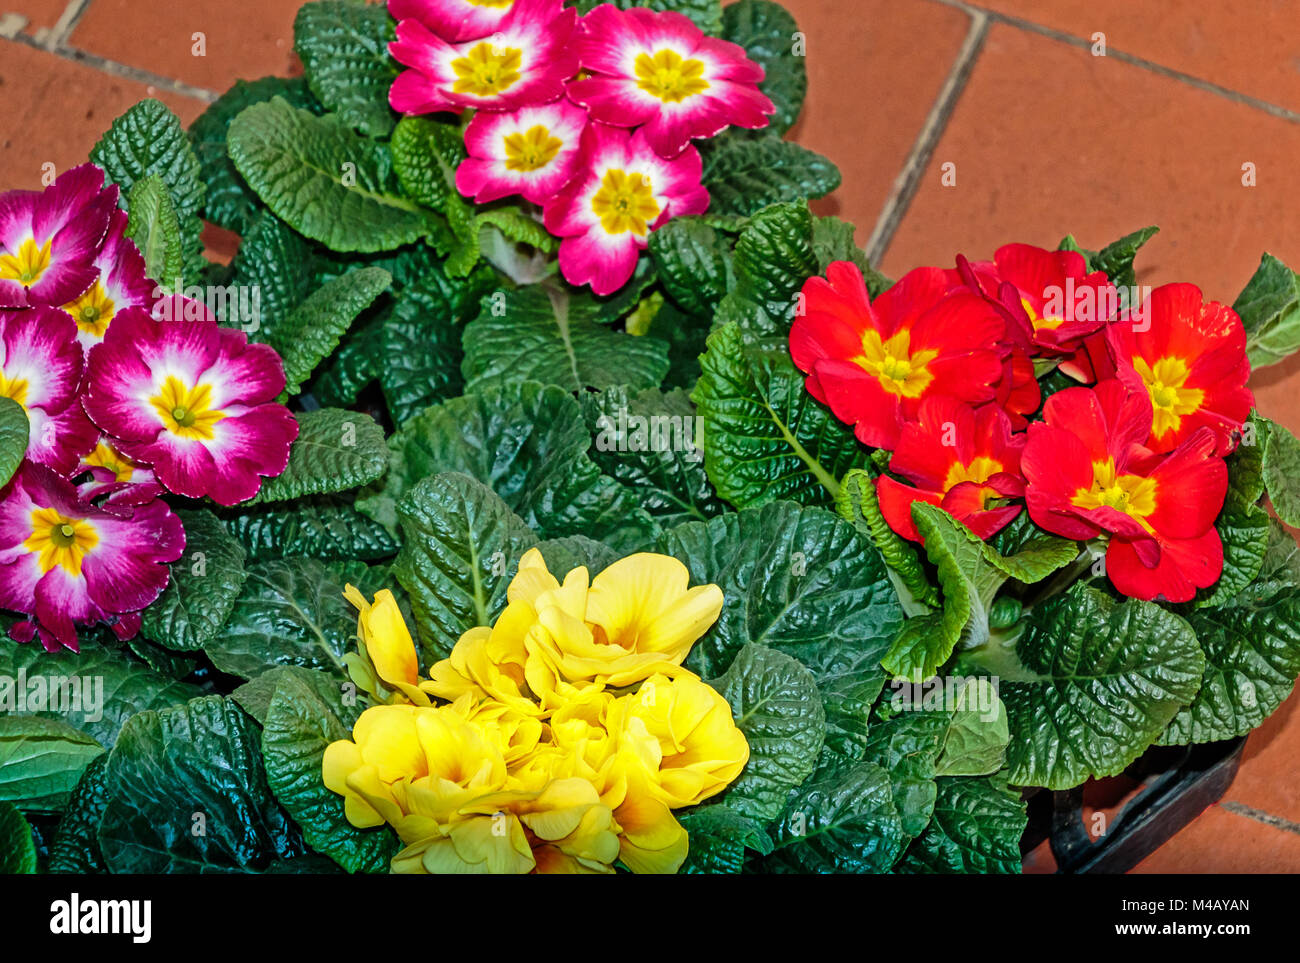 Spring flowers - potted primroses in different colors Stock Photo